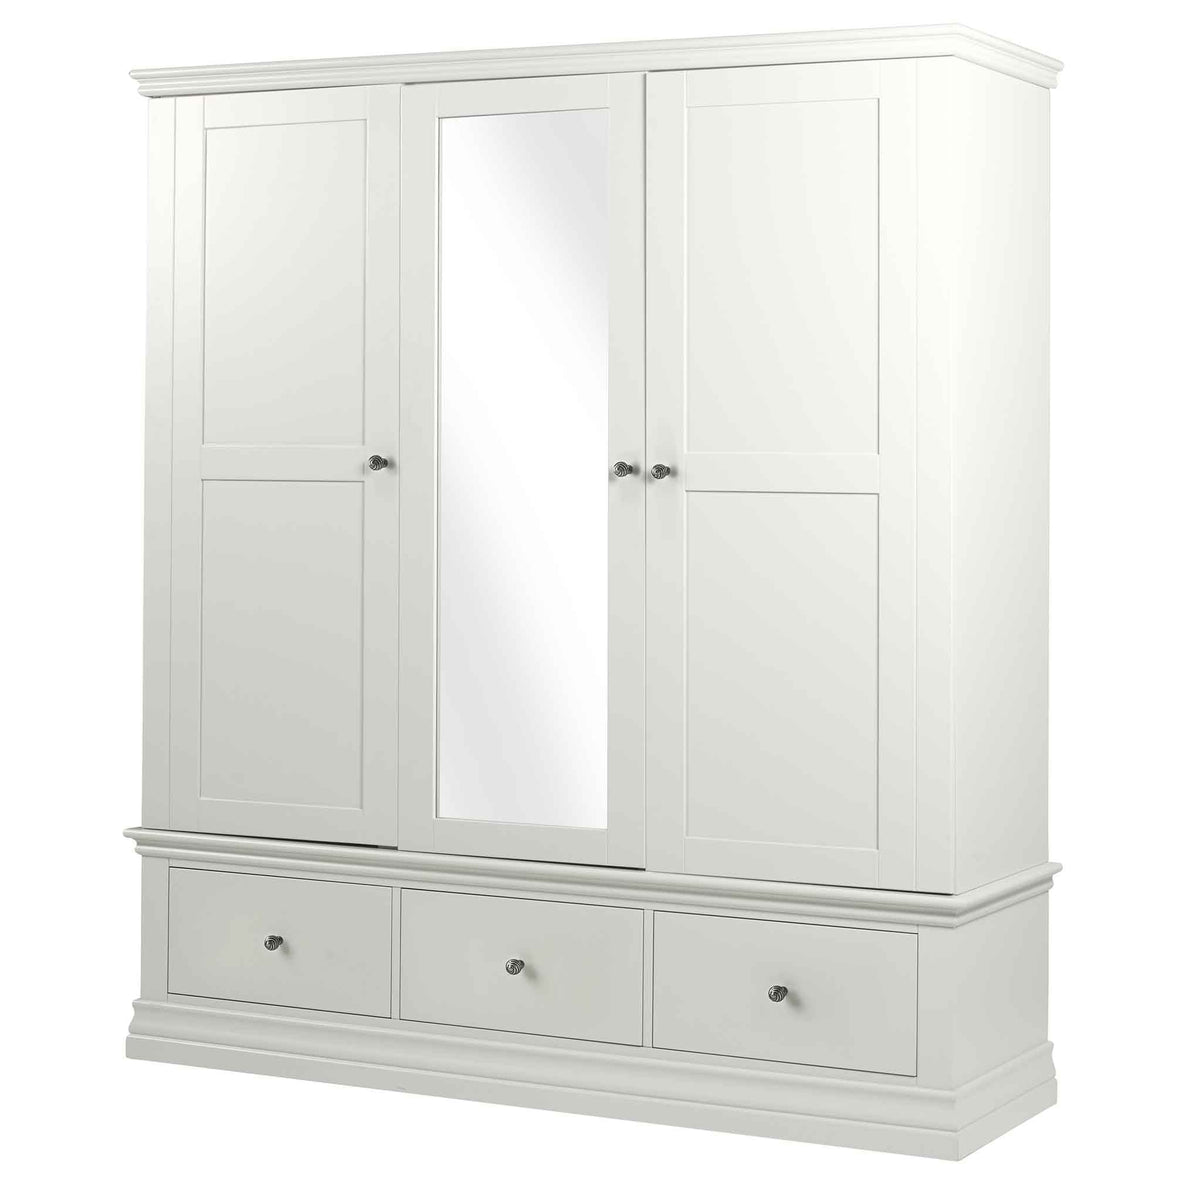 Melrose White 3 Door Wardrobe with Mirror and Drawers 